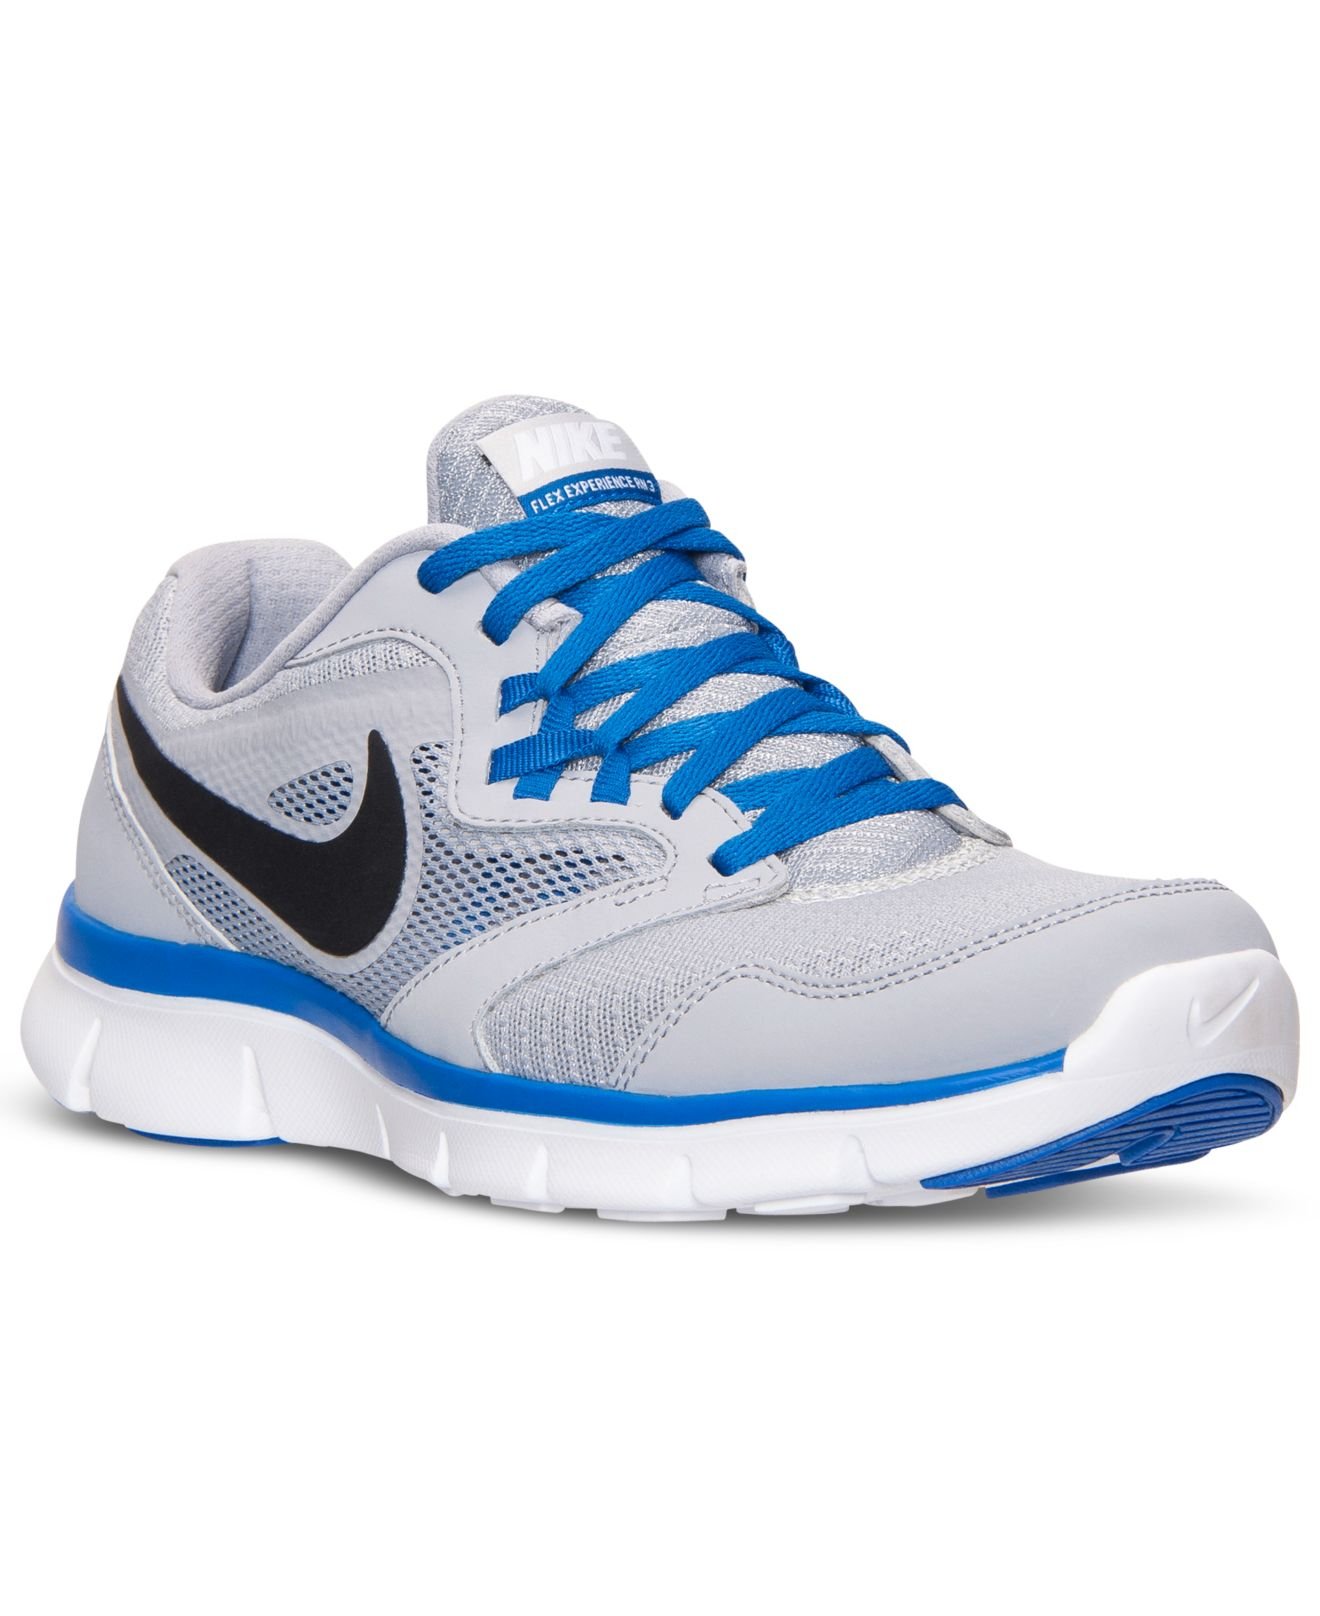 Nike Men's Flex Experience Run 3 Wide Running Sneakers From Finish Line